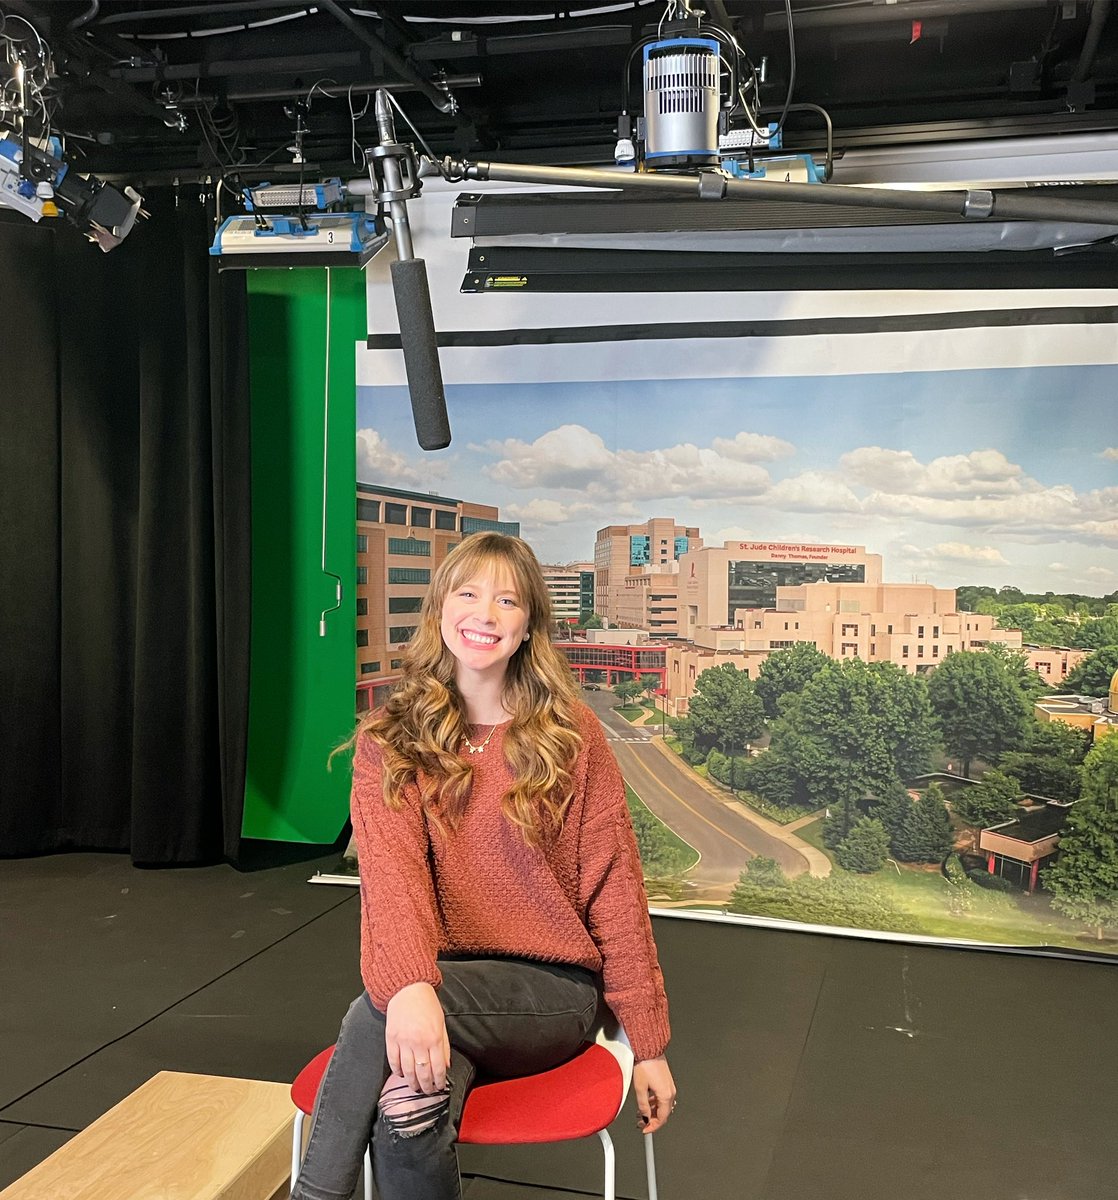 Last day of interviews in the studio! This year I’ve done literally hundreds of interviews through @inspiration4x to raise funds & awareness for @StJude. Had the ultimate motivation carrying me through, the brave St. Jude patients. I4 has now raised over 240 million dollars🥰!